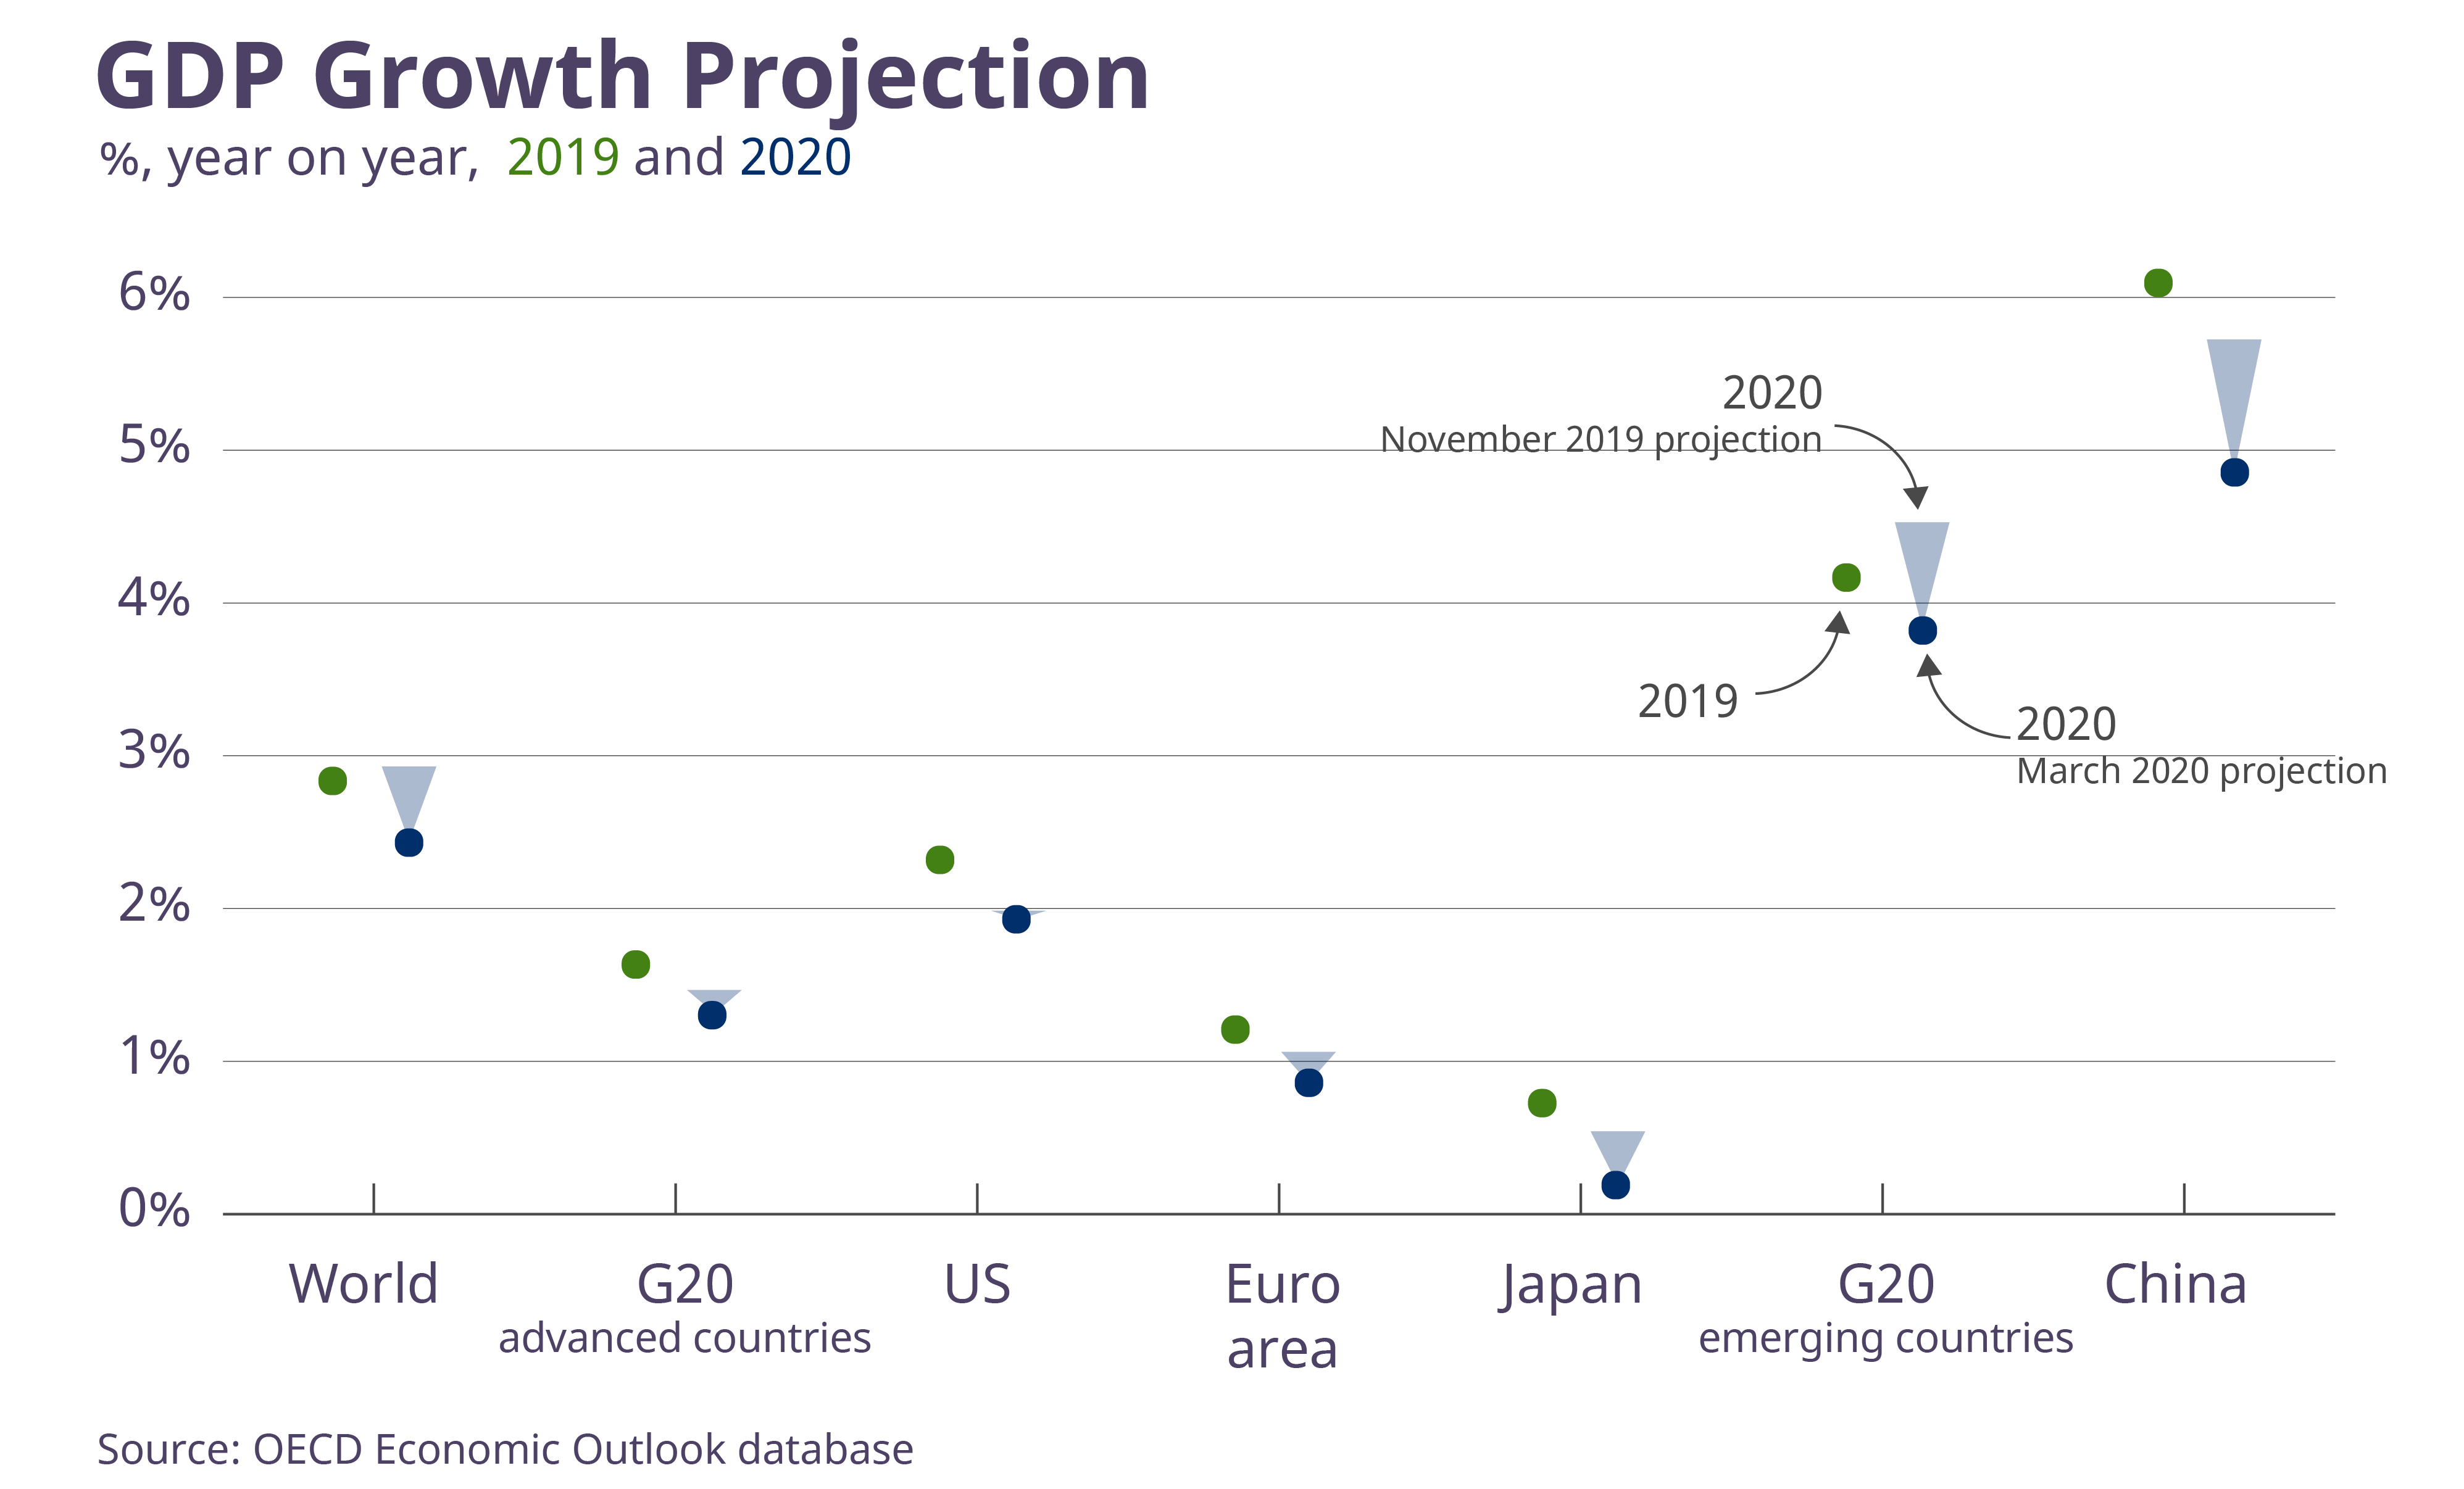 GDP Growth Projection, %, year on year, 2019 and 2020